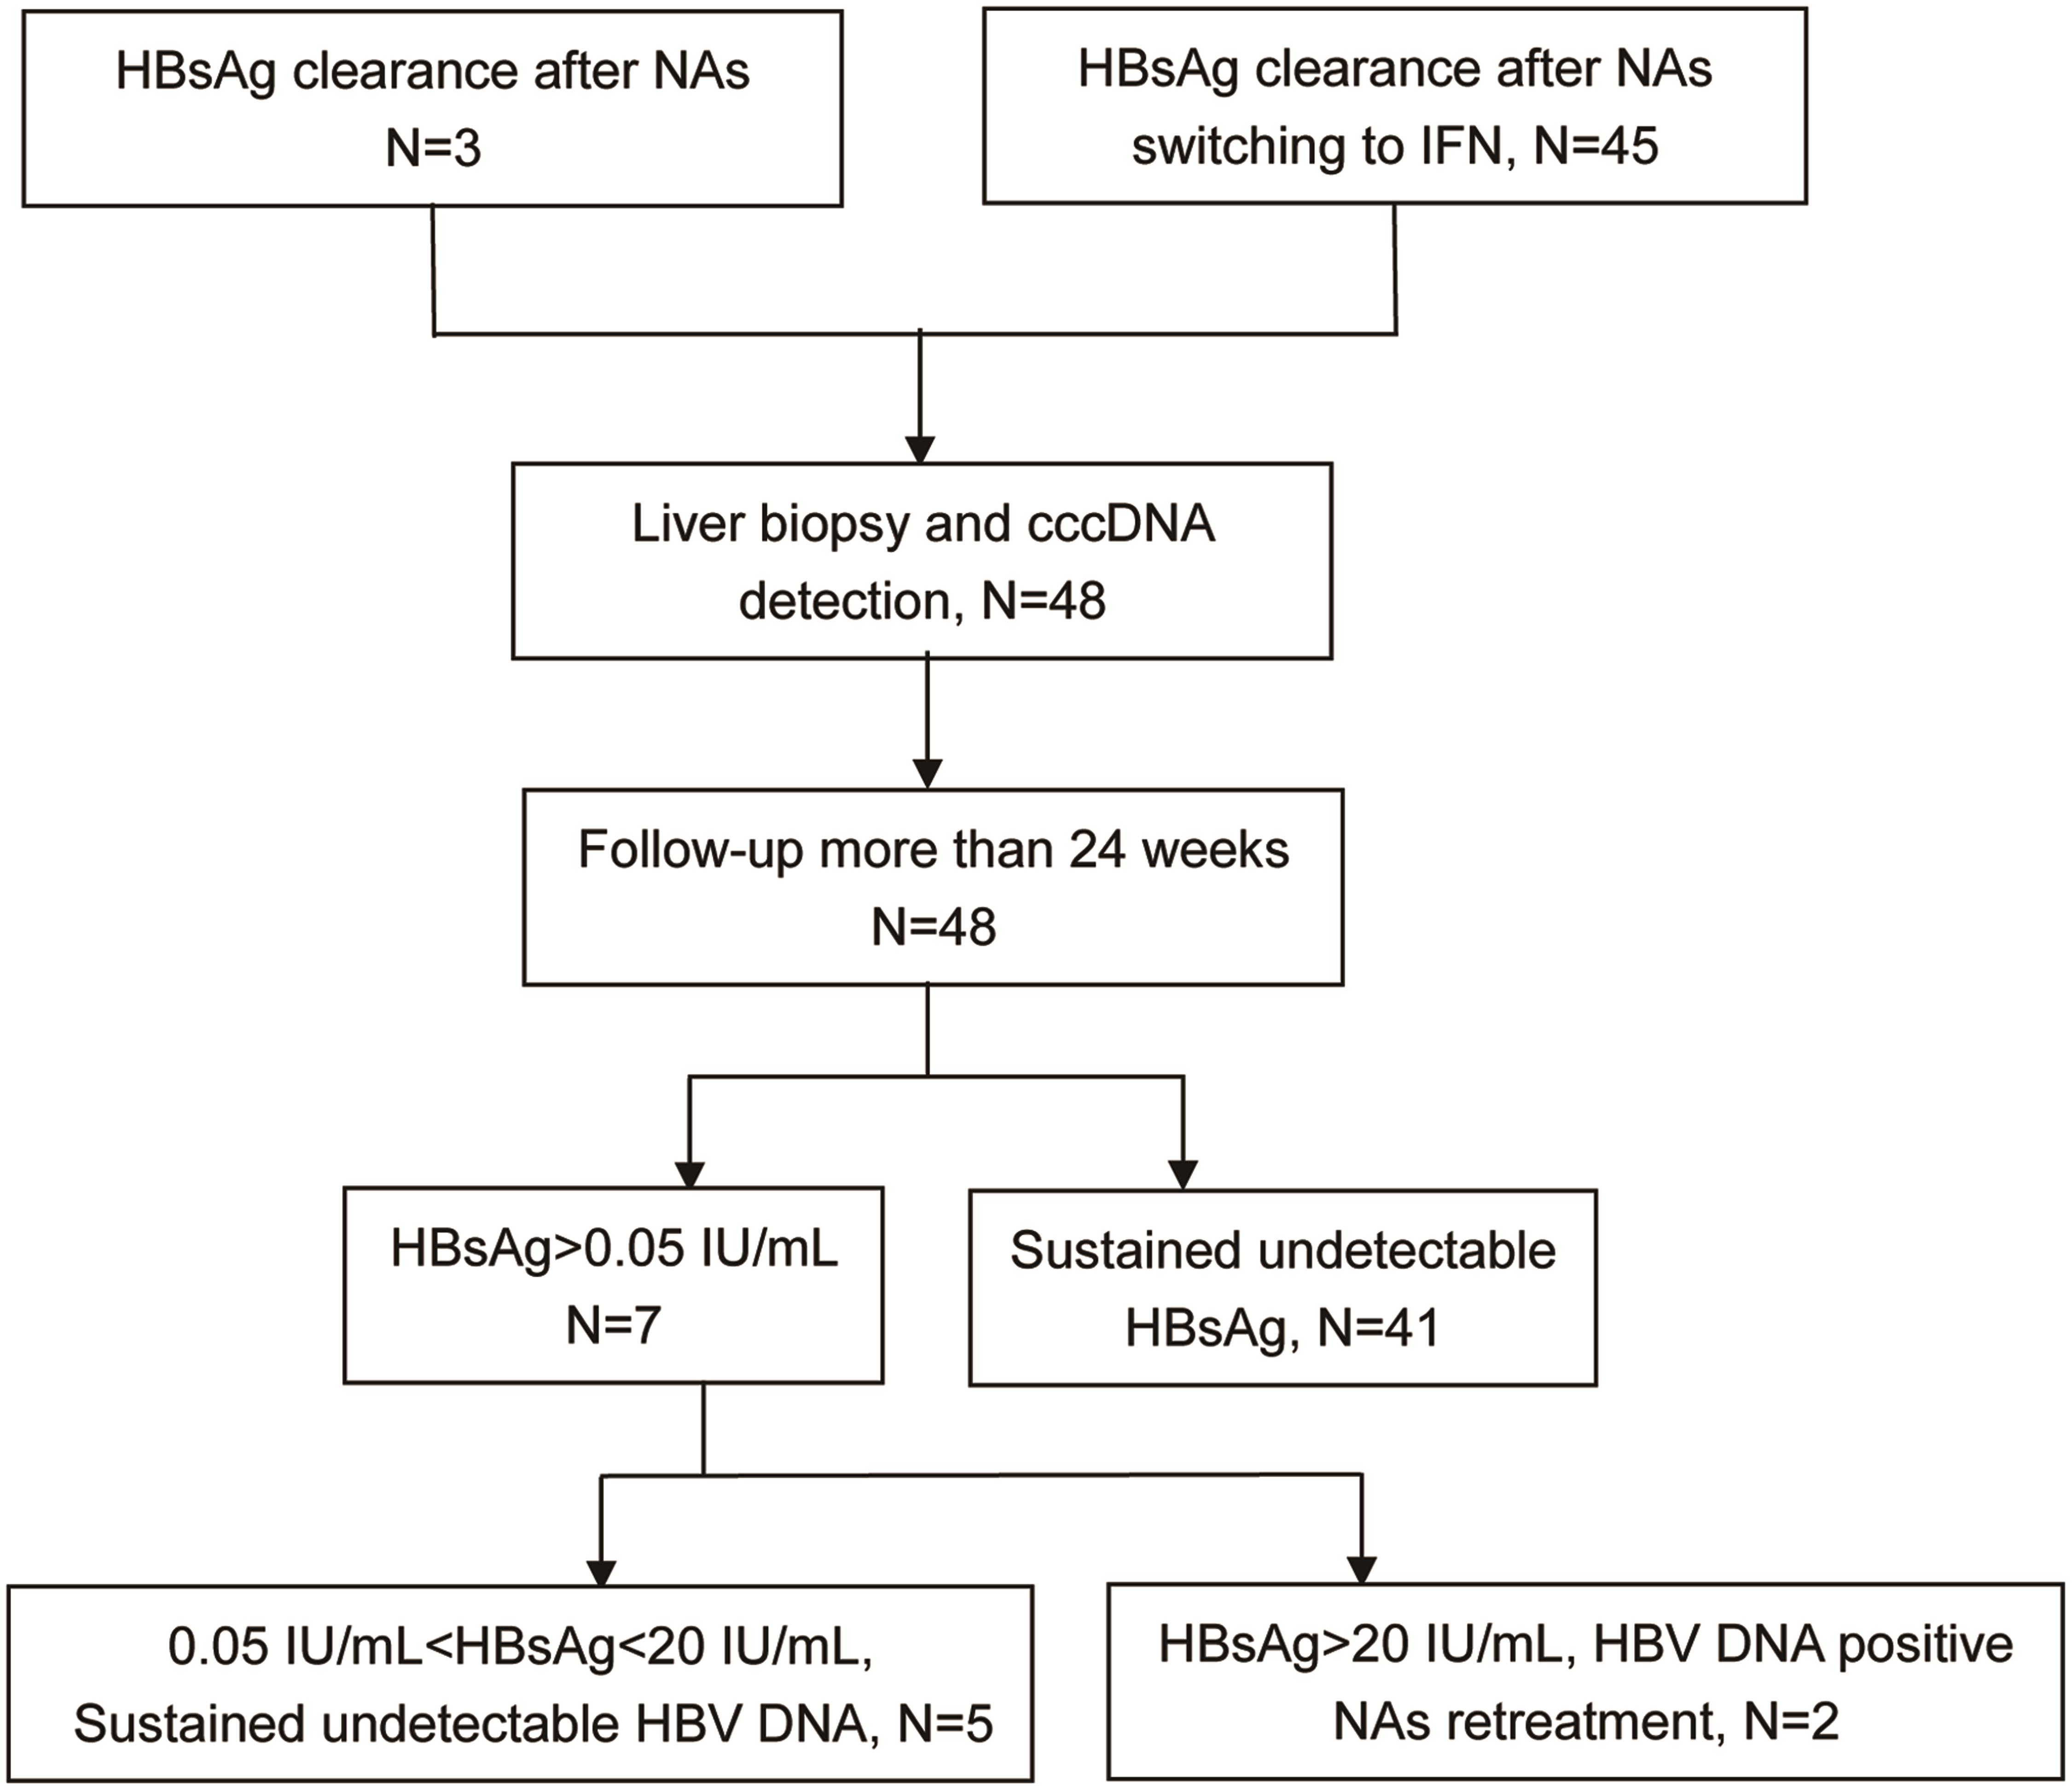 Roadmap of follow-up in chronic hepatitis B patients with a functional cure.